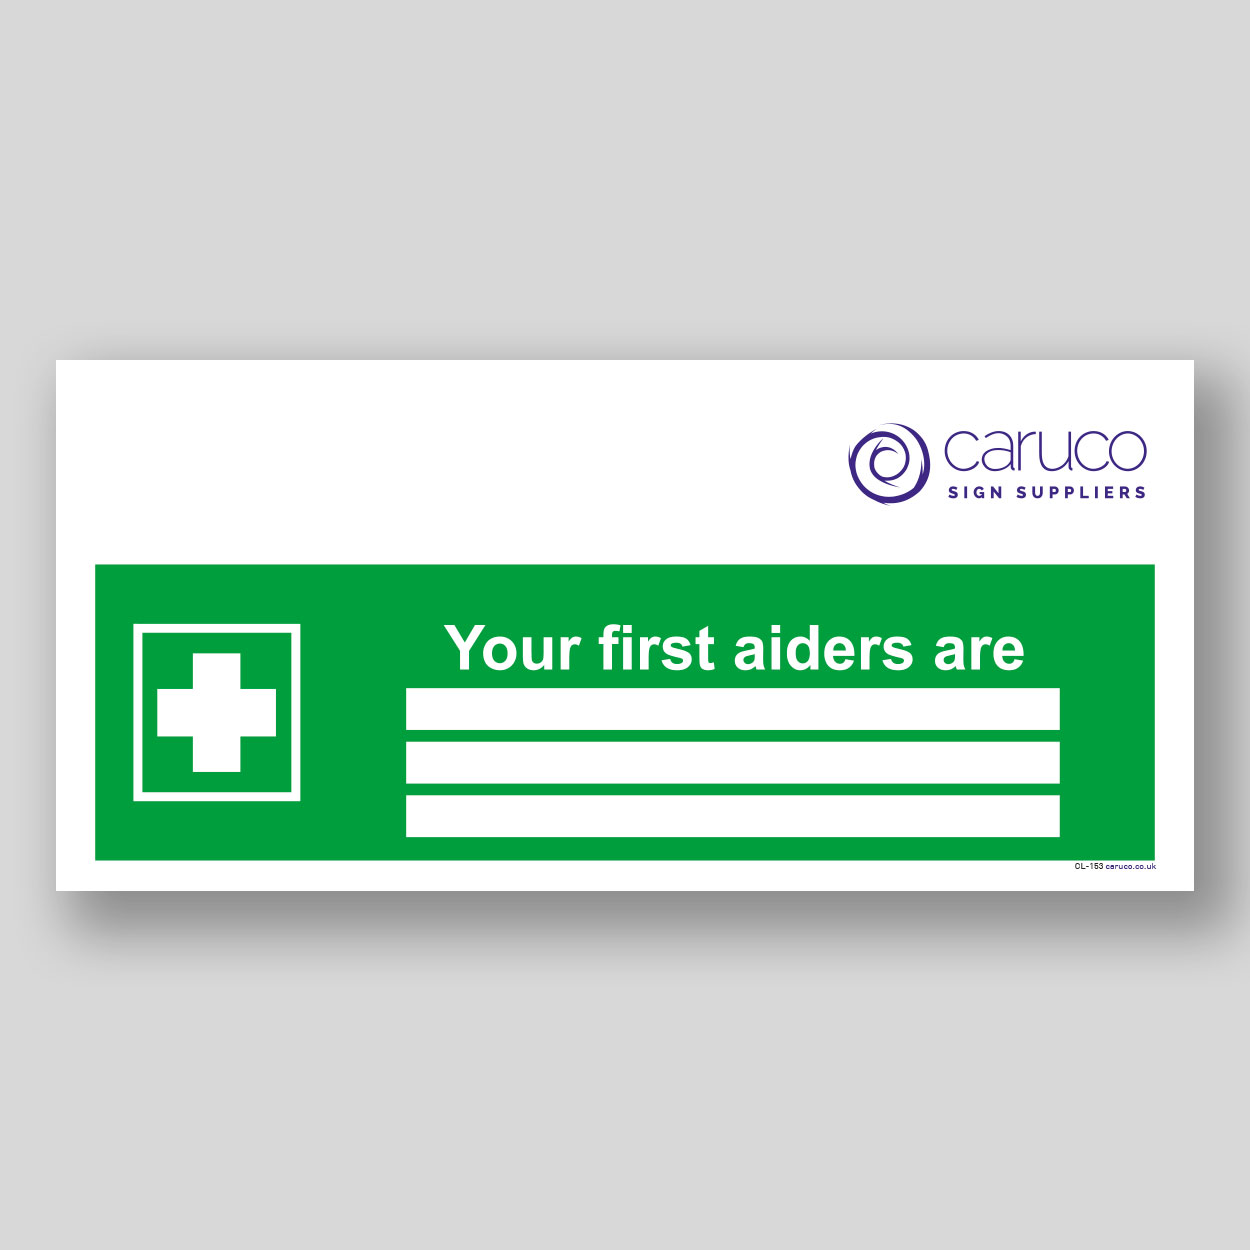 CL-153 Your first aiders are